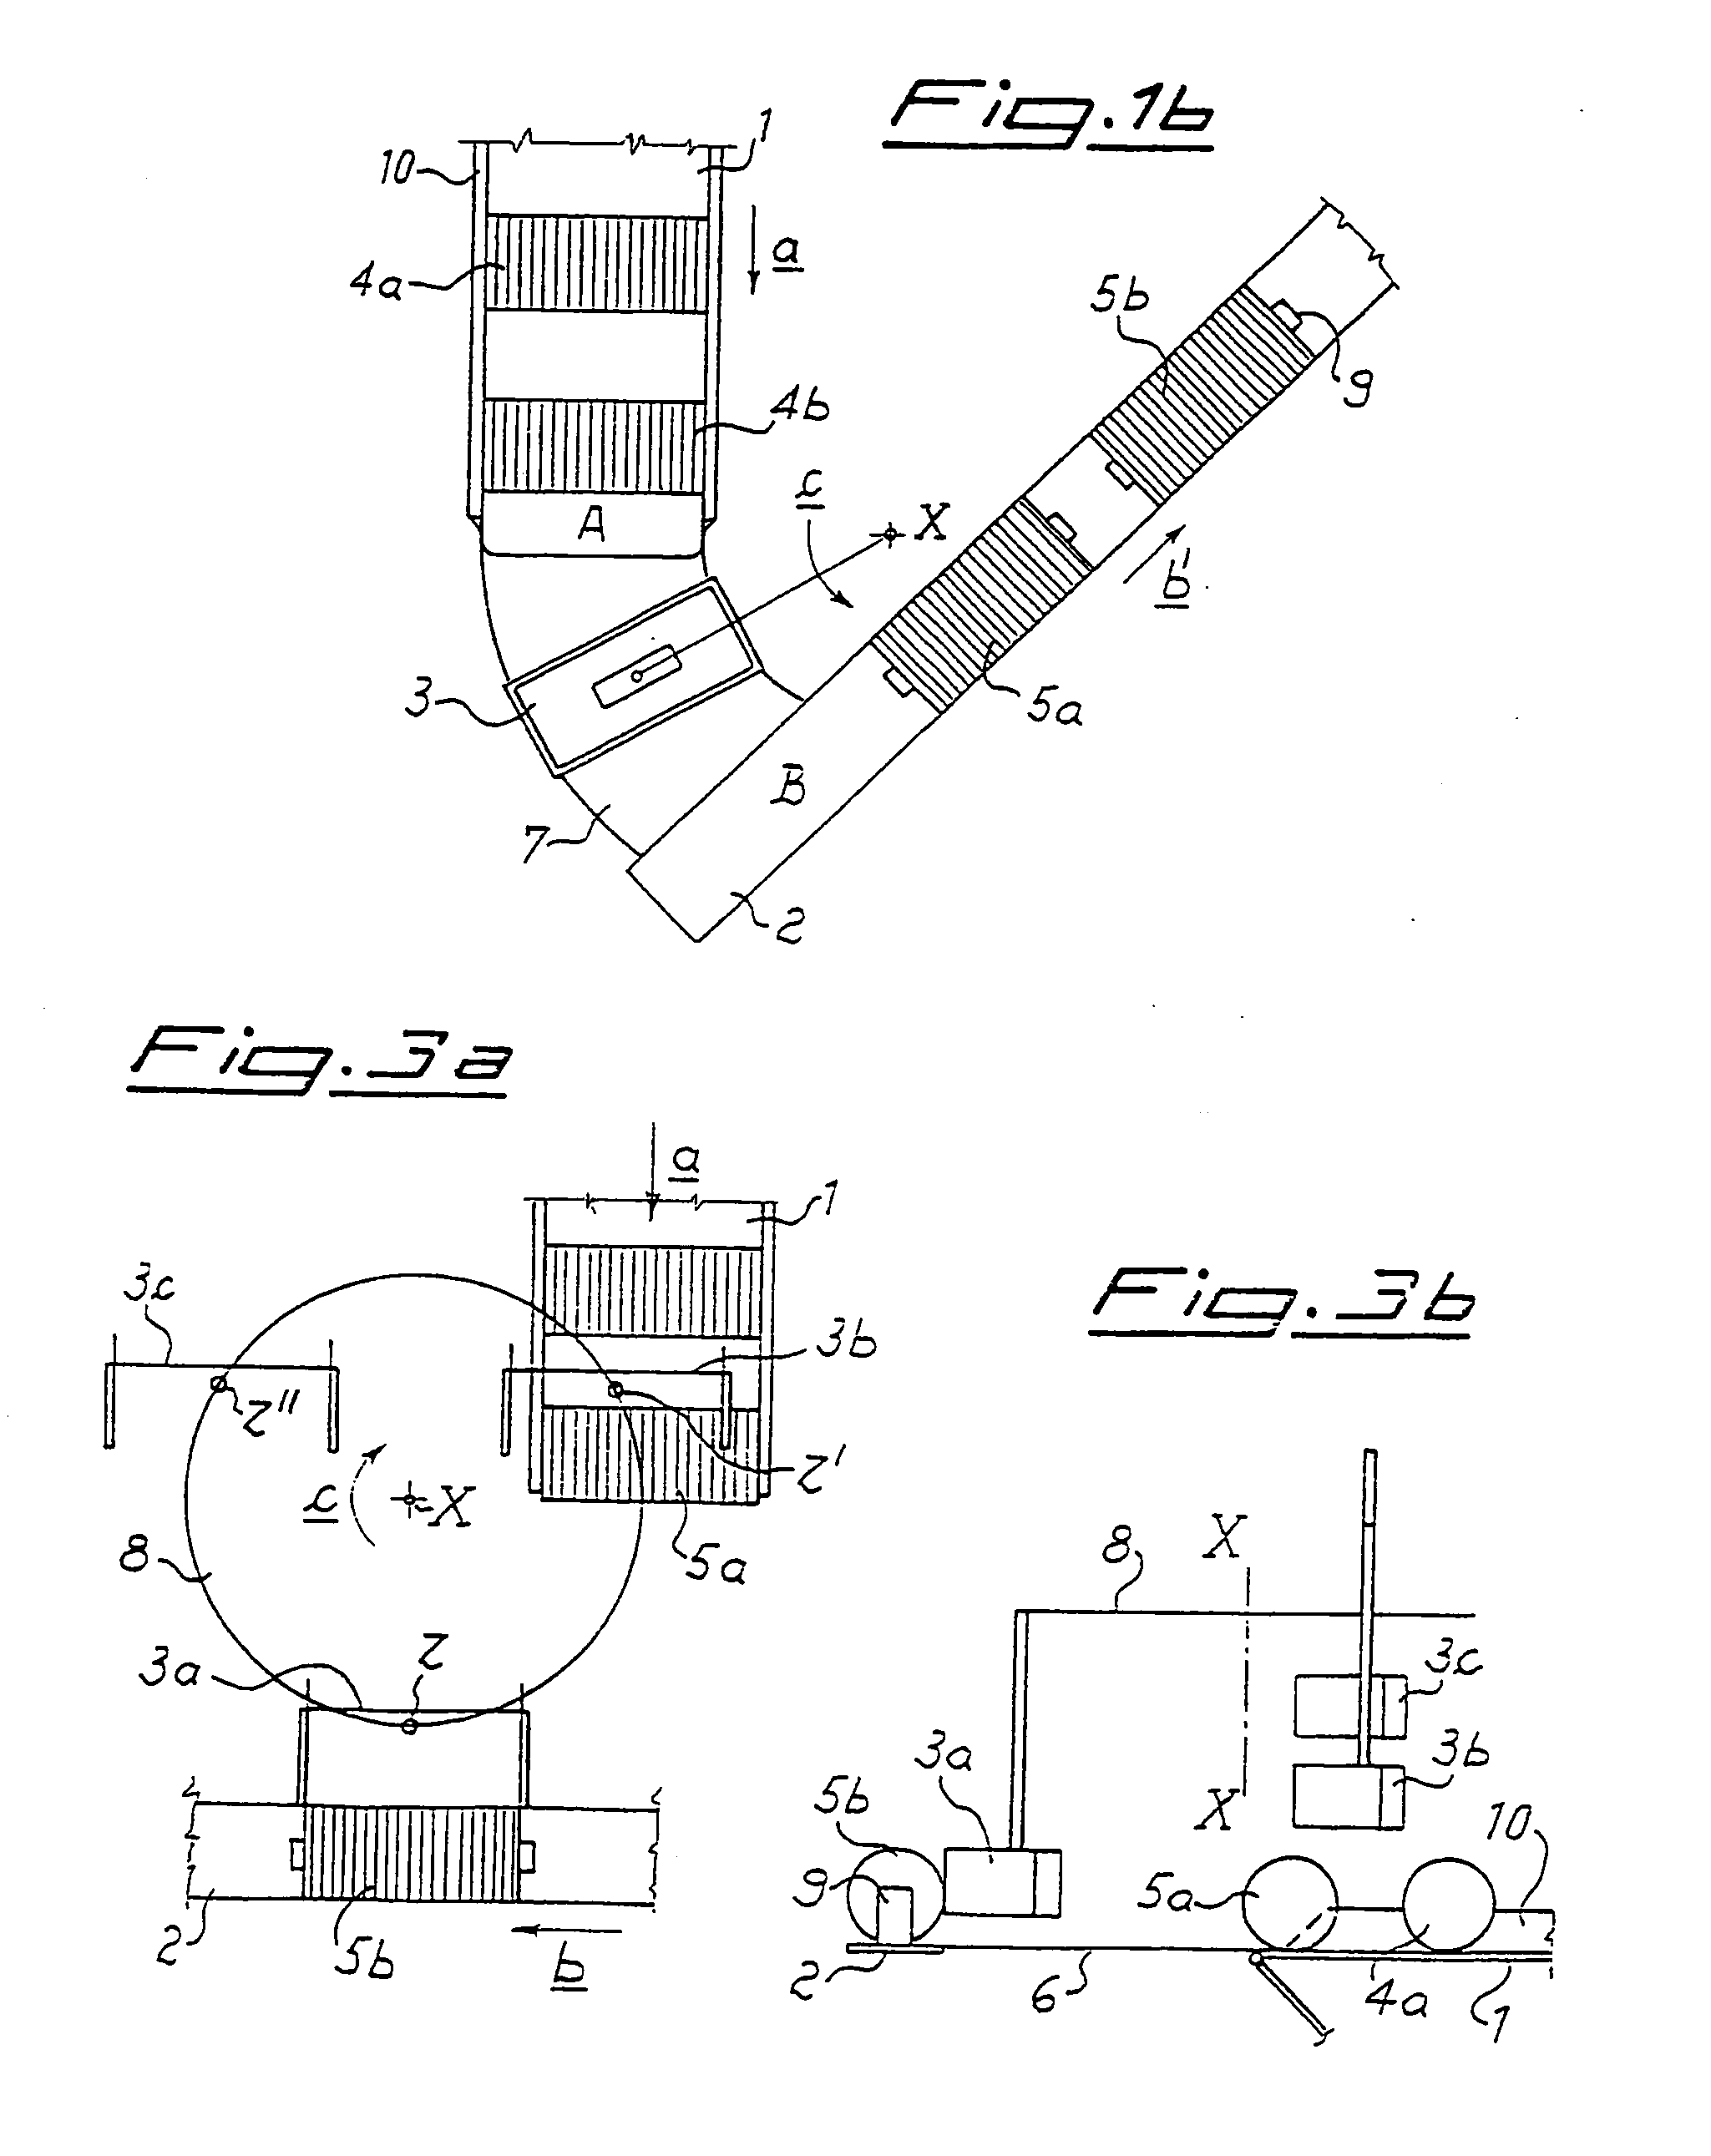 Transfer device for cylindrical stacks of products arranged on an edge